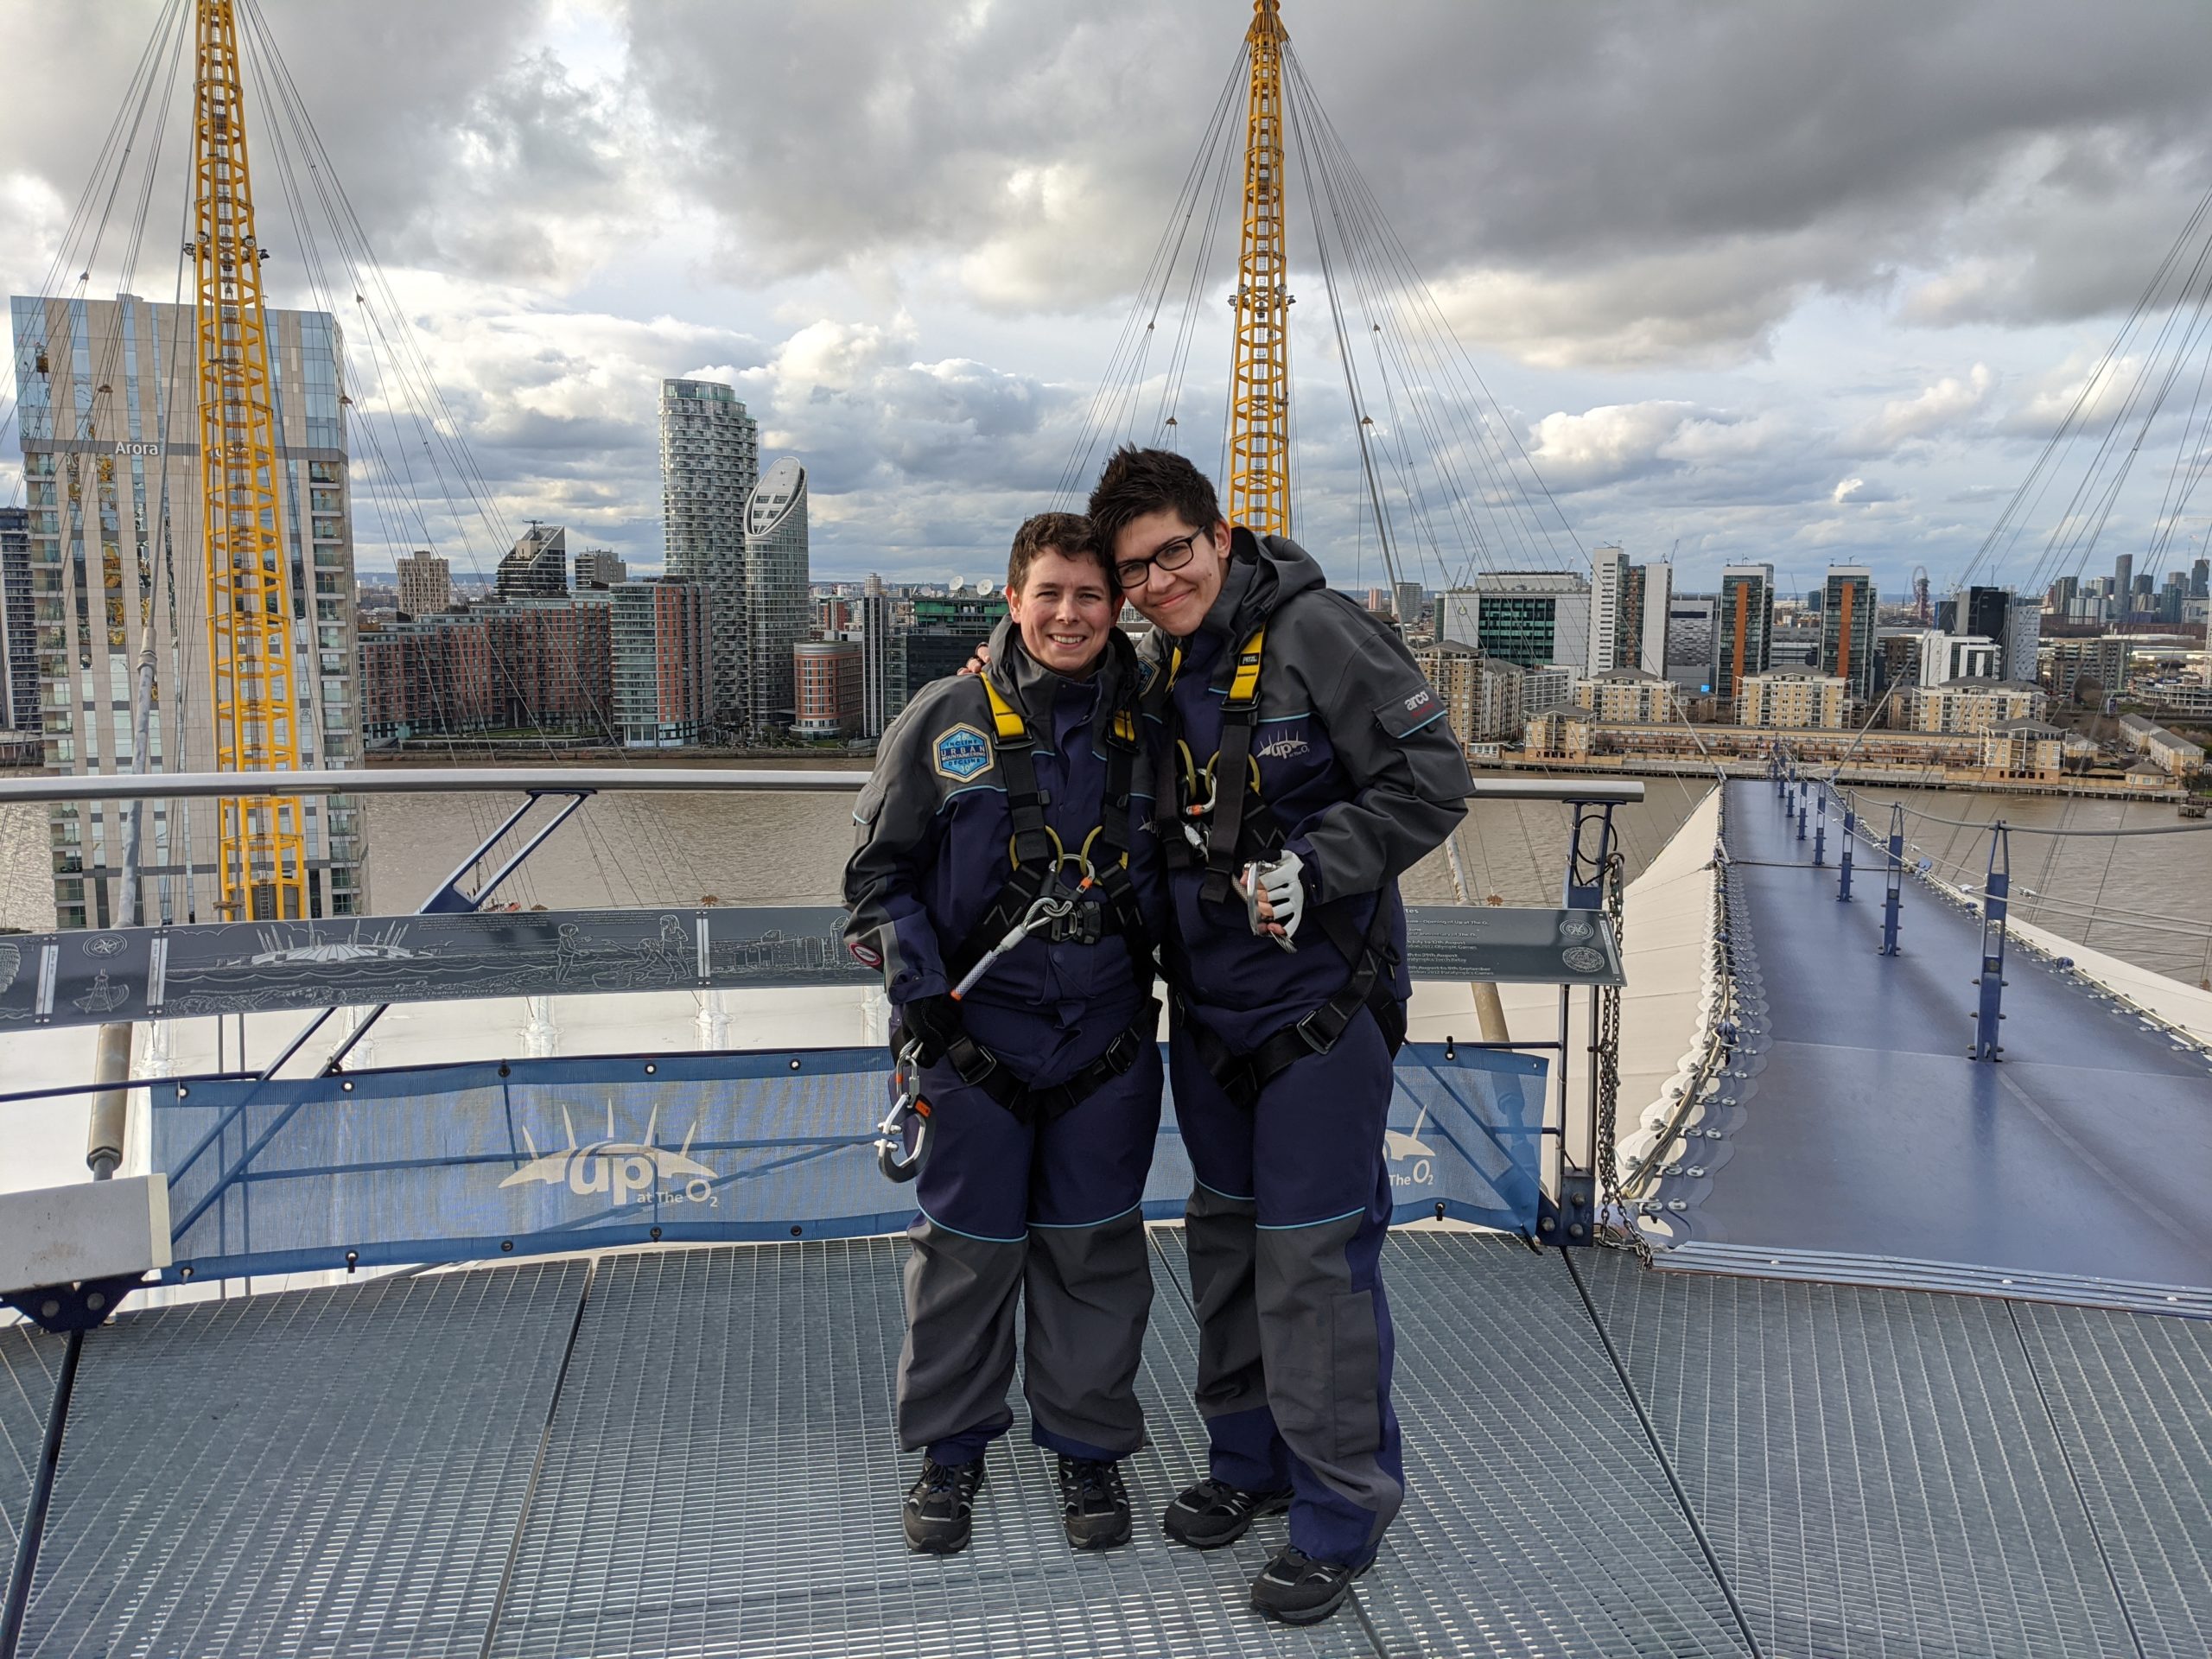 Picture of Sharon and I standing at the top of The O2 after our climb. A London Skyline sits behind us. We are dressed in climbing gear and have climbing equipment attached to us,